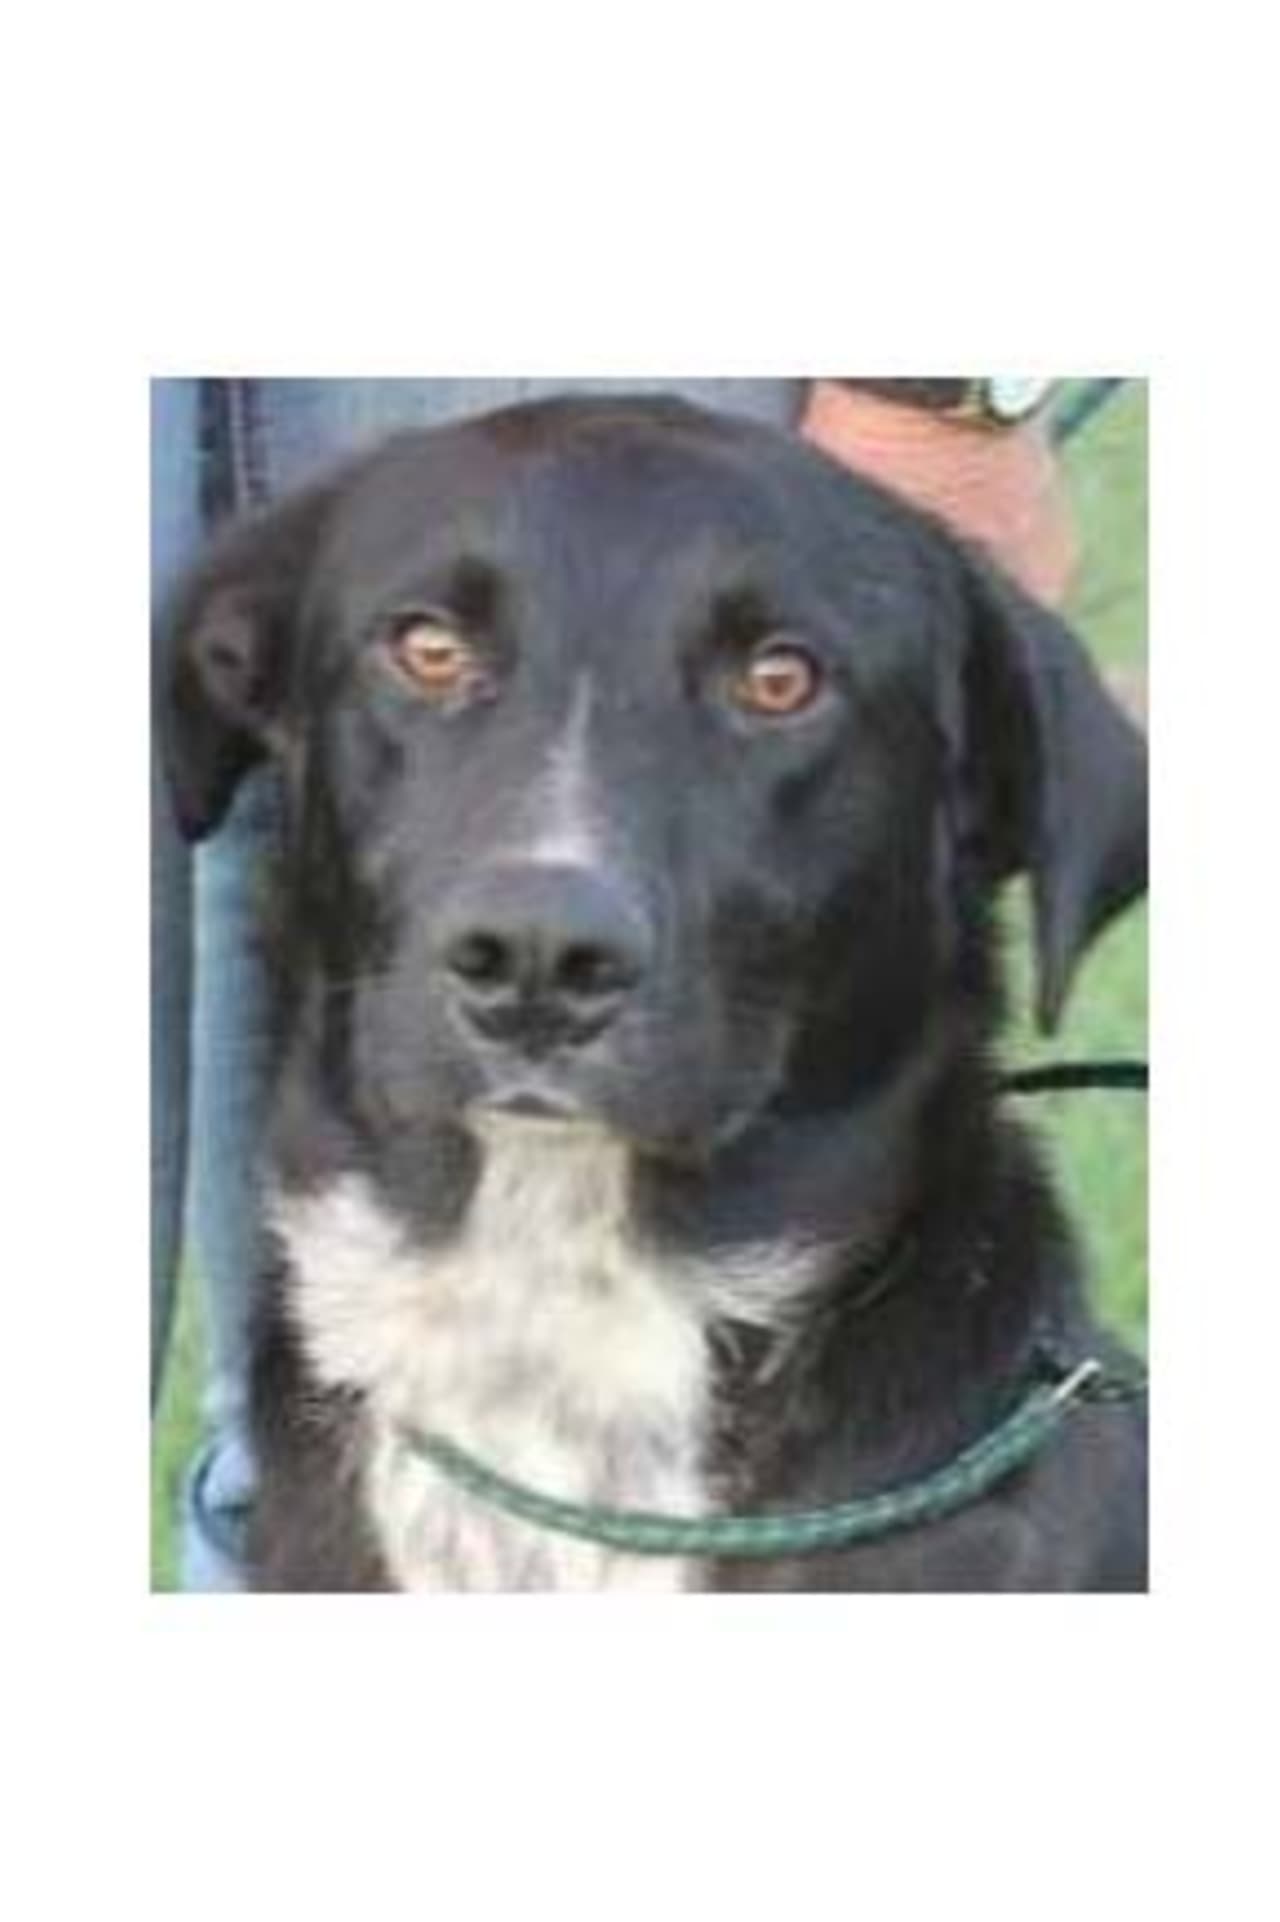 Buddy, a lab/border collie mix, is one of many adoptable pets available at the SPCA of Westchester in Briarcliff Manor.